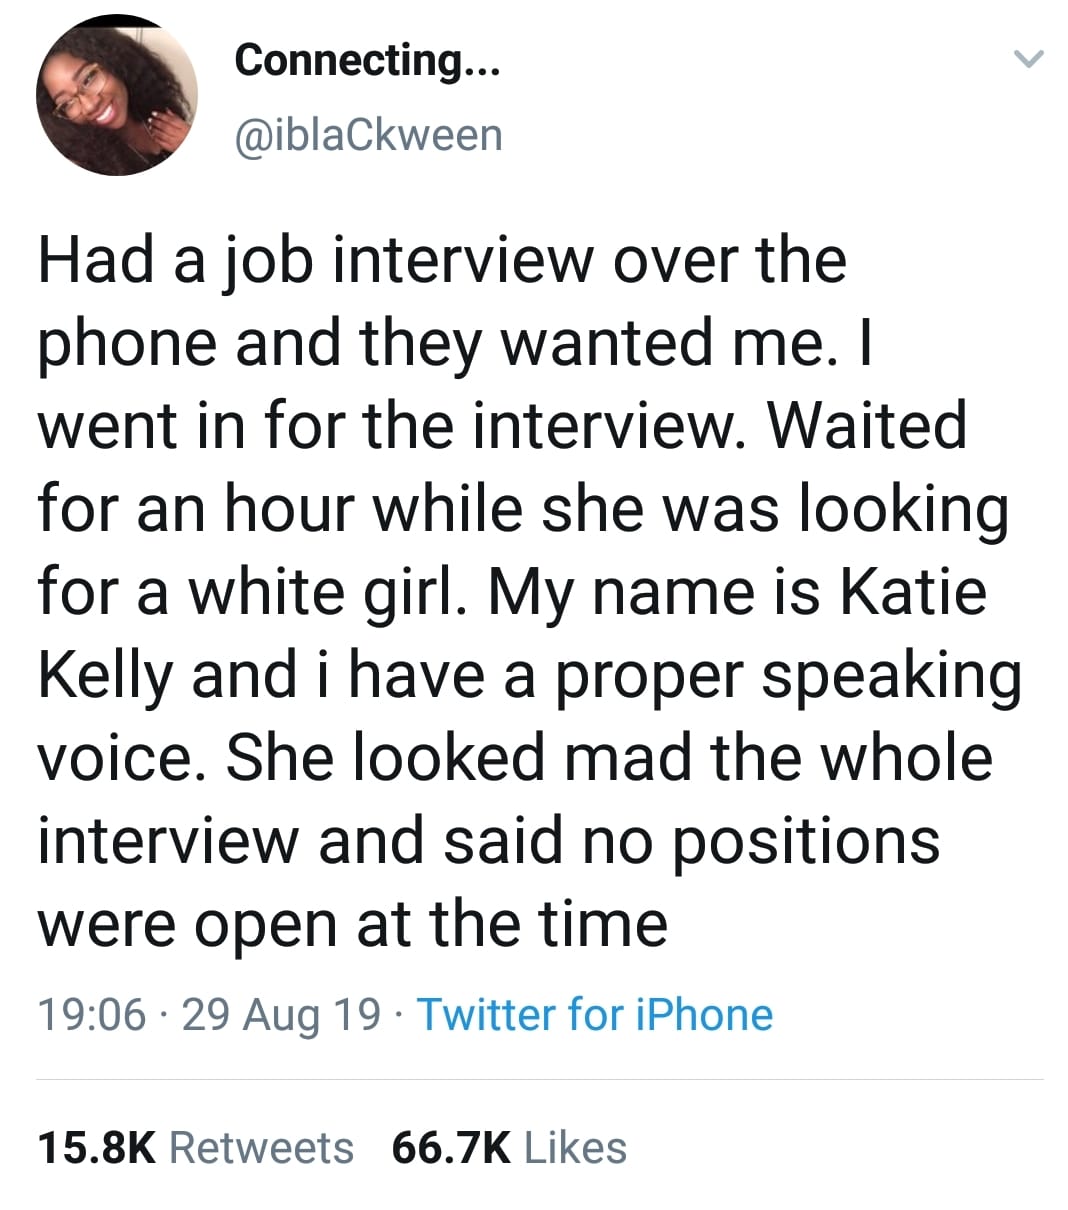 tweets black-twitter-memes tweets text: Connecting... @iblaCkween Had a job interview over the phone and they wanted me. I went in for the interview. Waited for an hour while she was looking for a white girl. My name is Katie Kelly and i have a proper speaking voice. She looked mad the whole interview and said no positions were open at the time 19:06 • 29 Aug 19 • Twitter for iPhone Likes 15.8K 66.7K Retweets 